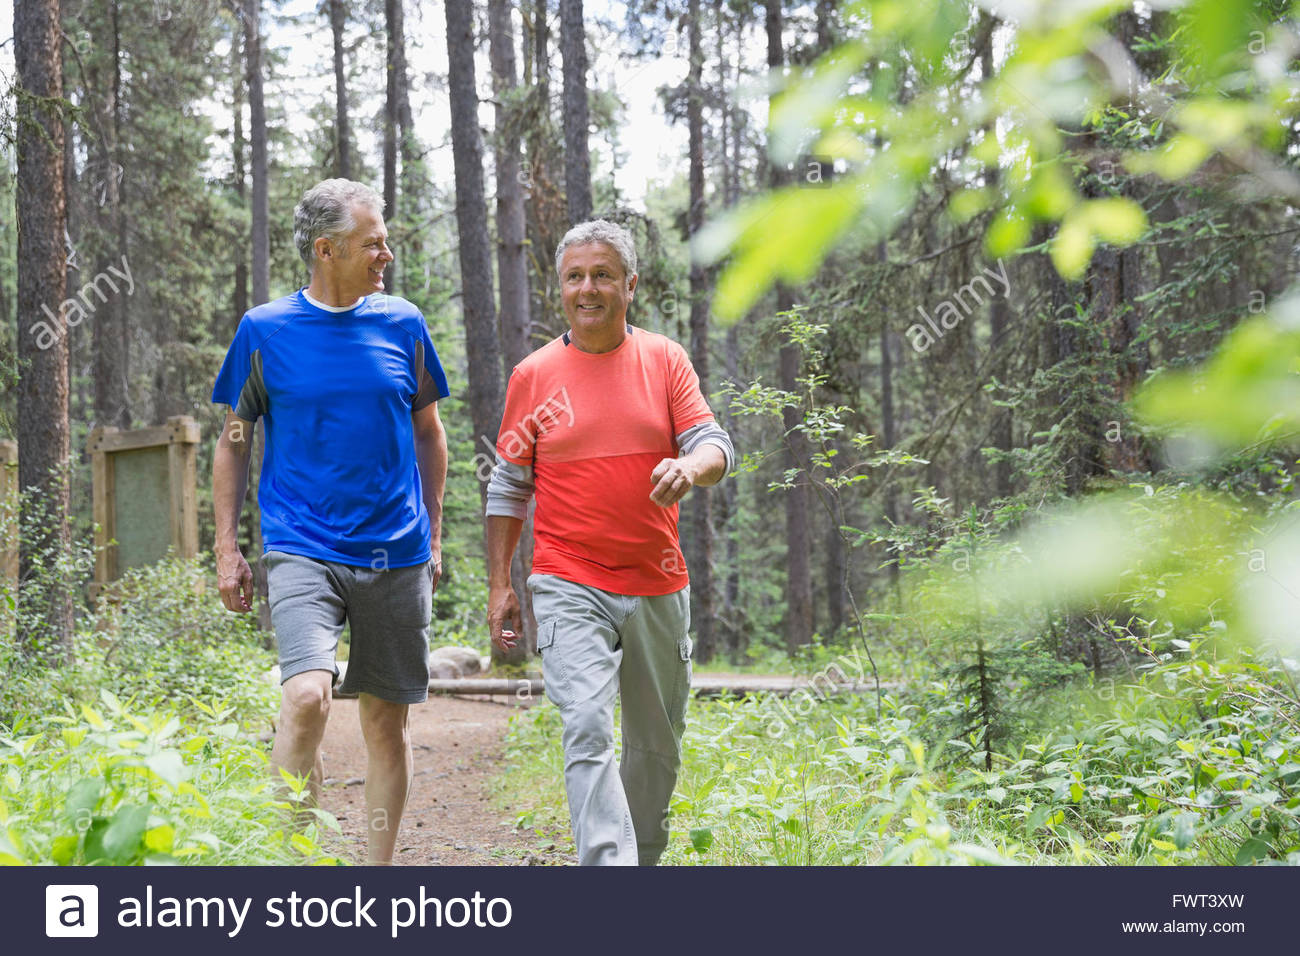 Middle-aged men walking in forest Stock Photo